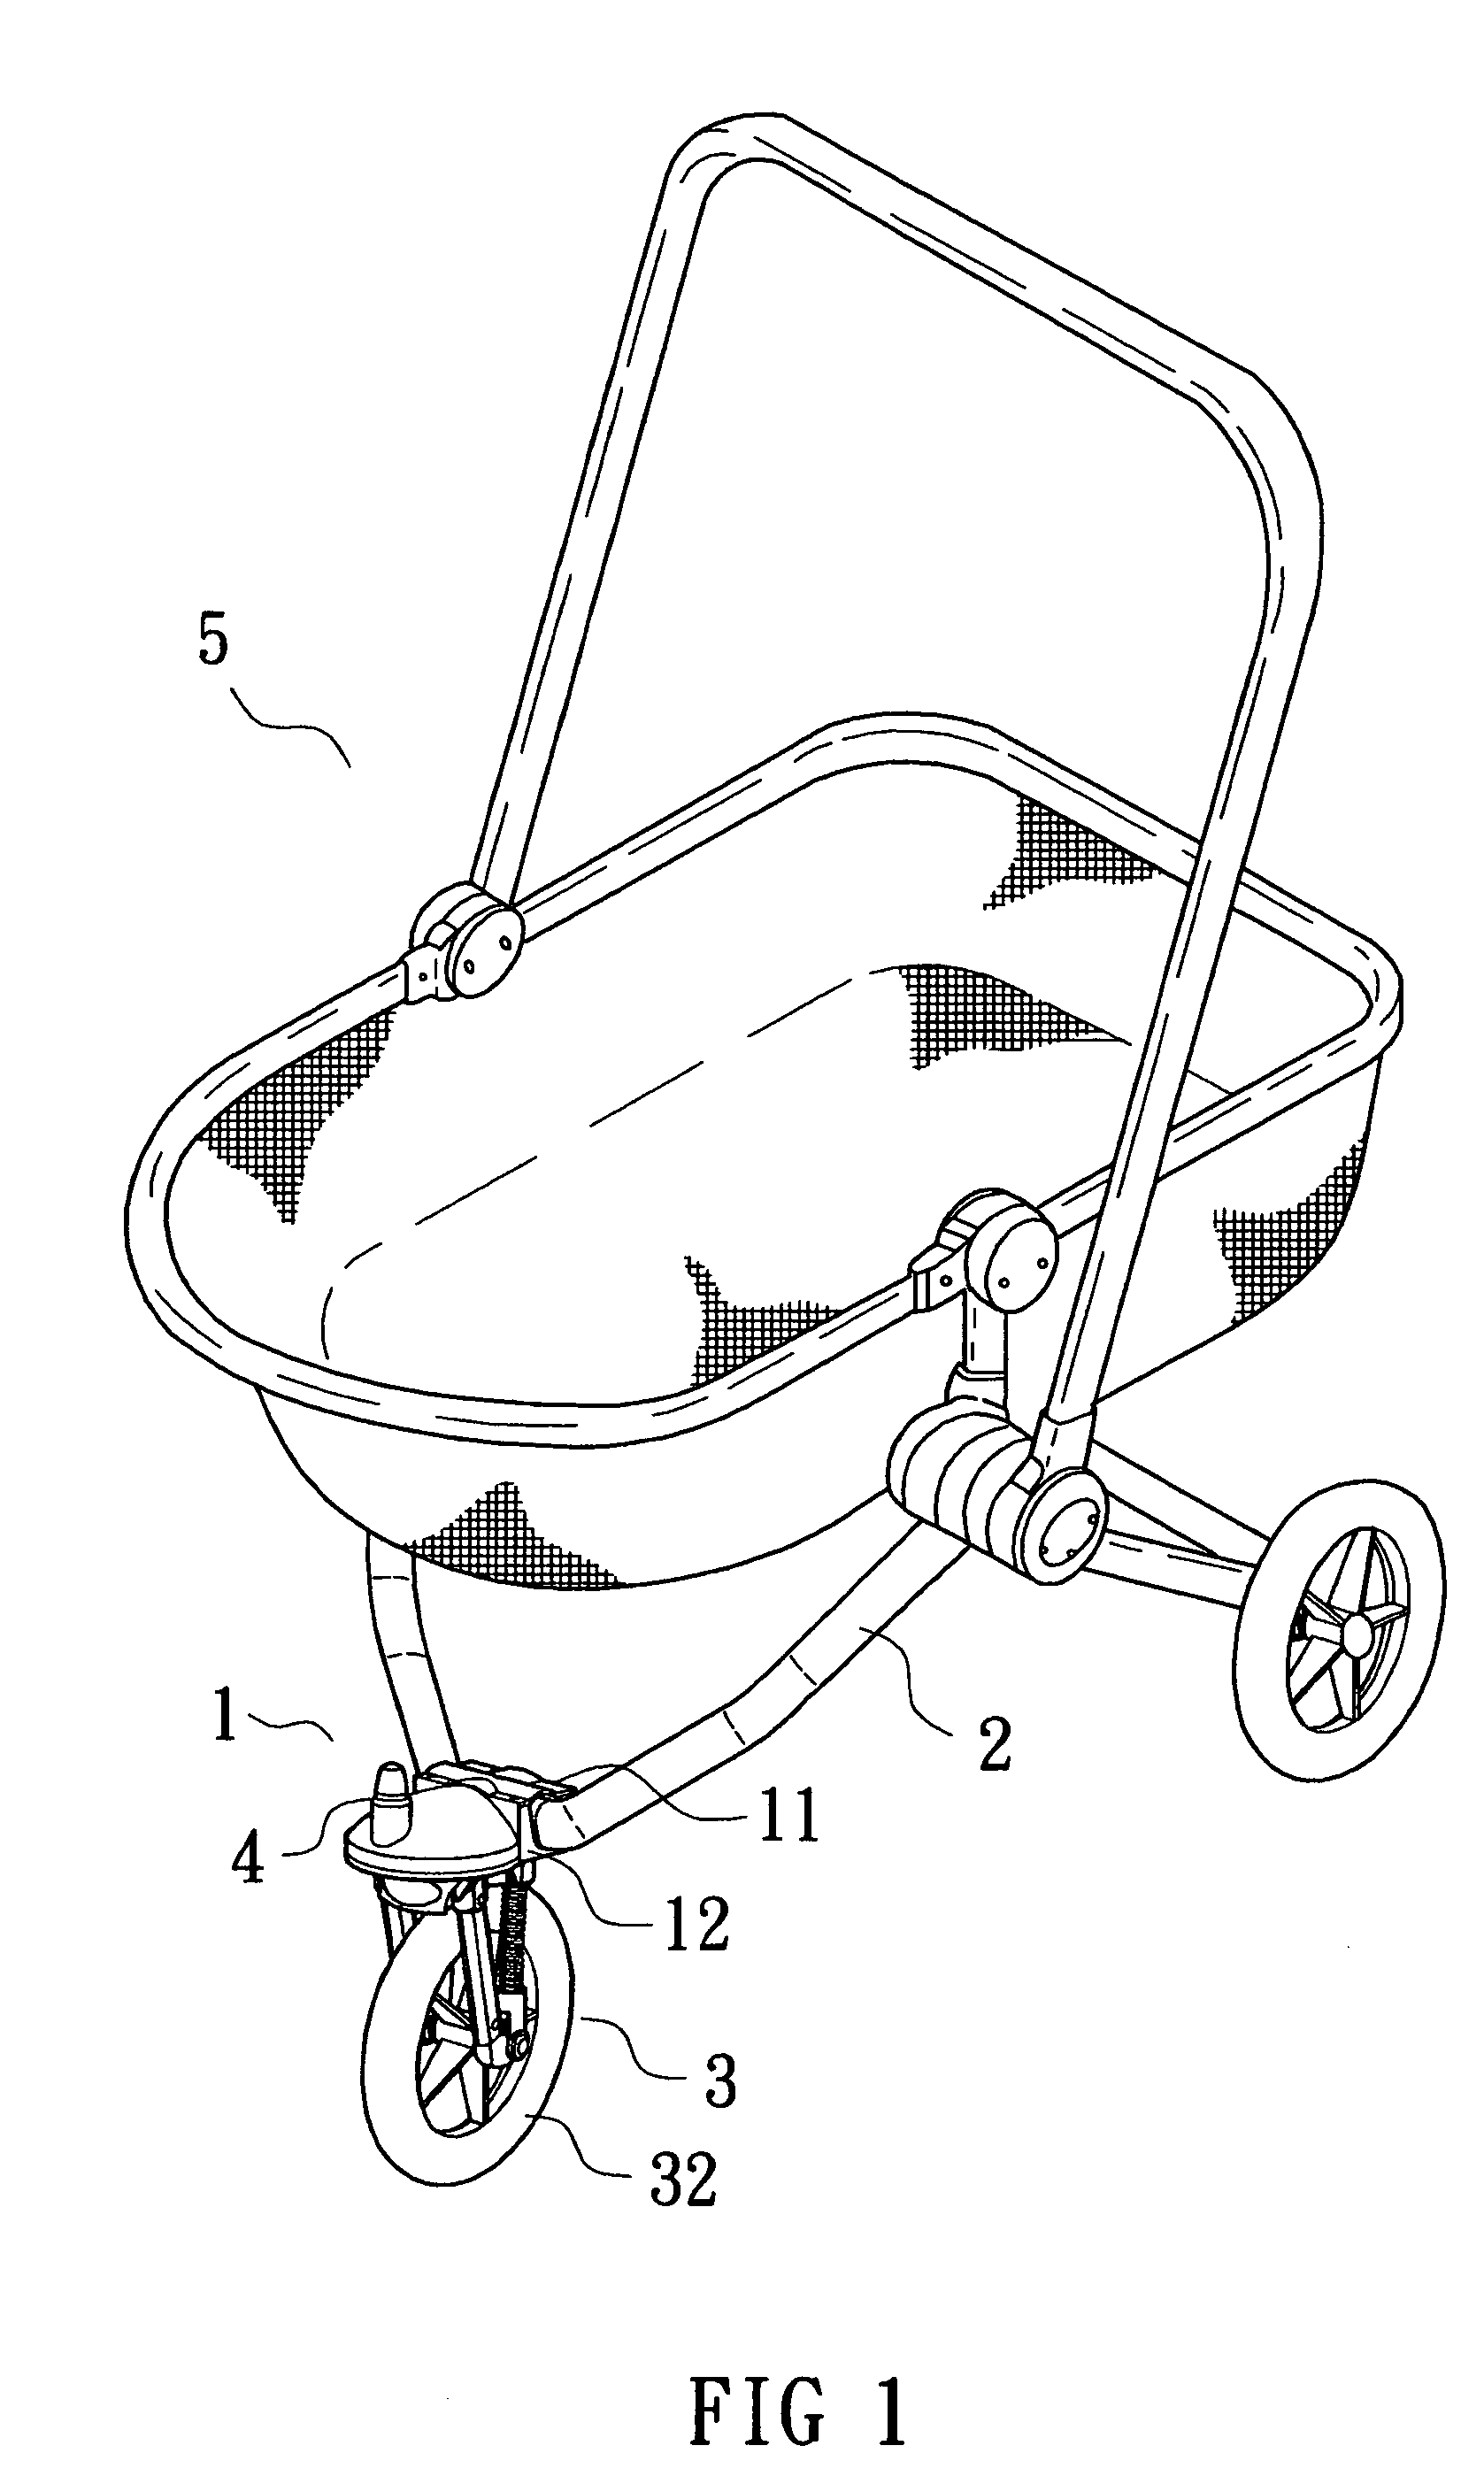 Direction-limiting device for stroller